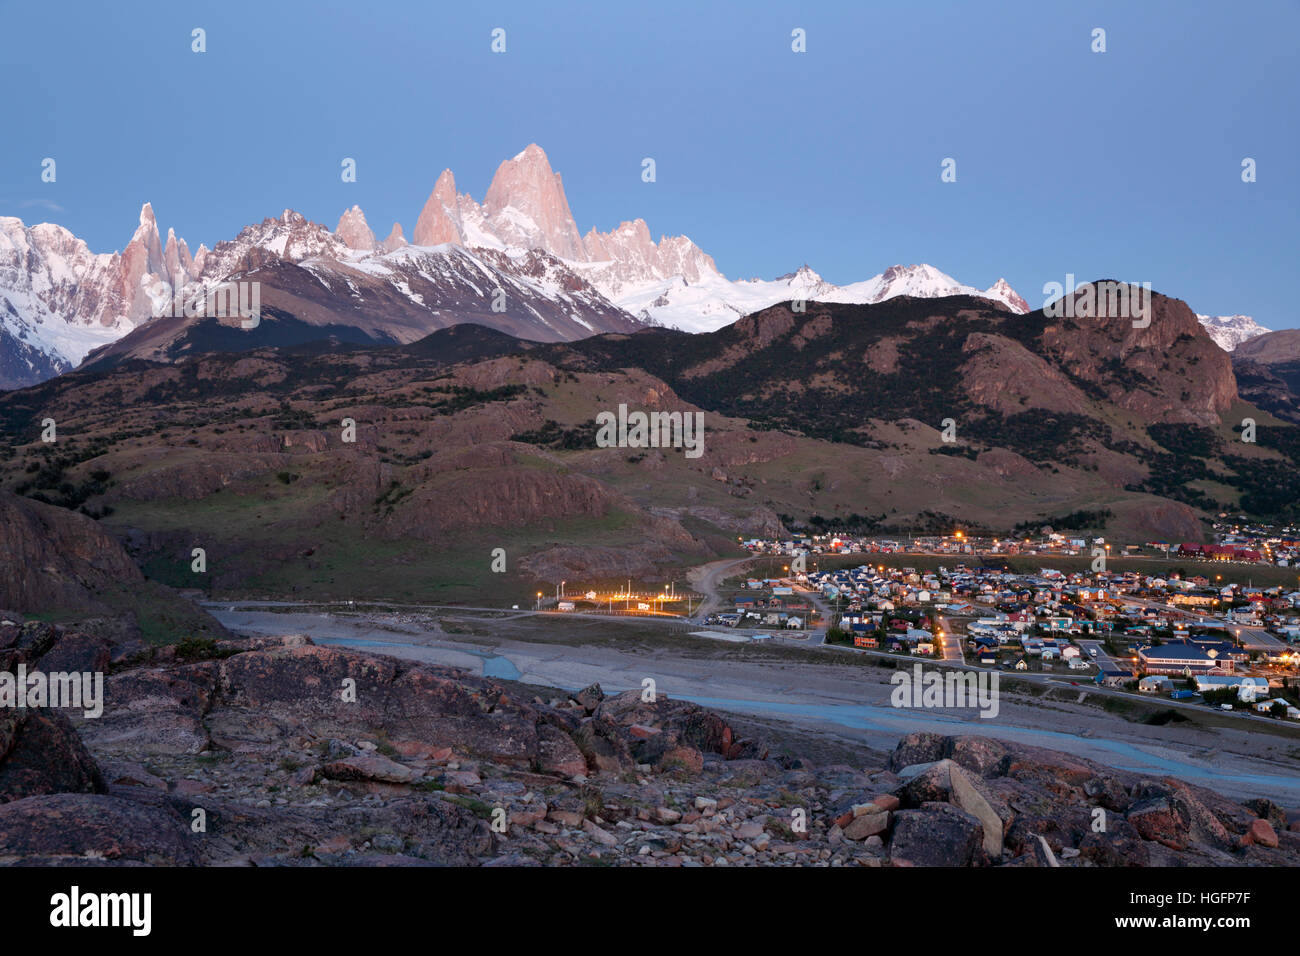 View over Mount Fitz Roy and Cerro Torre with town of El Chalten, El Chalten, Patagonia, Argentina, South America Stock Photo